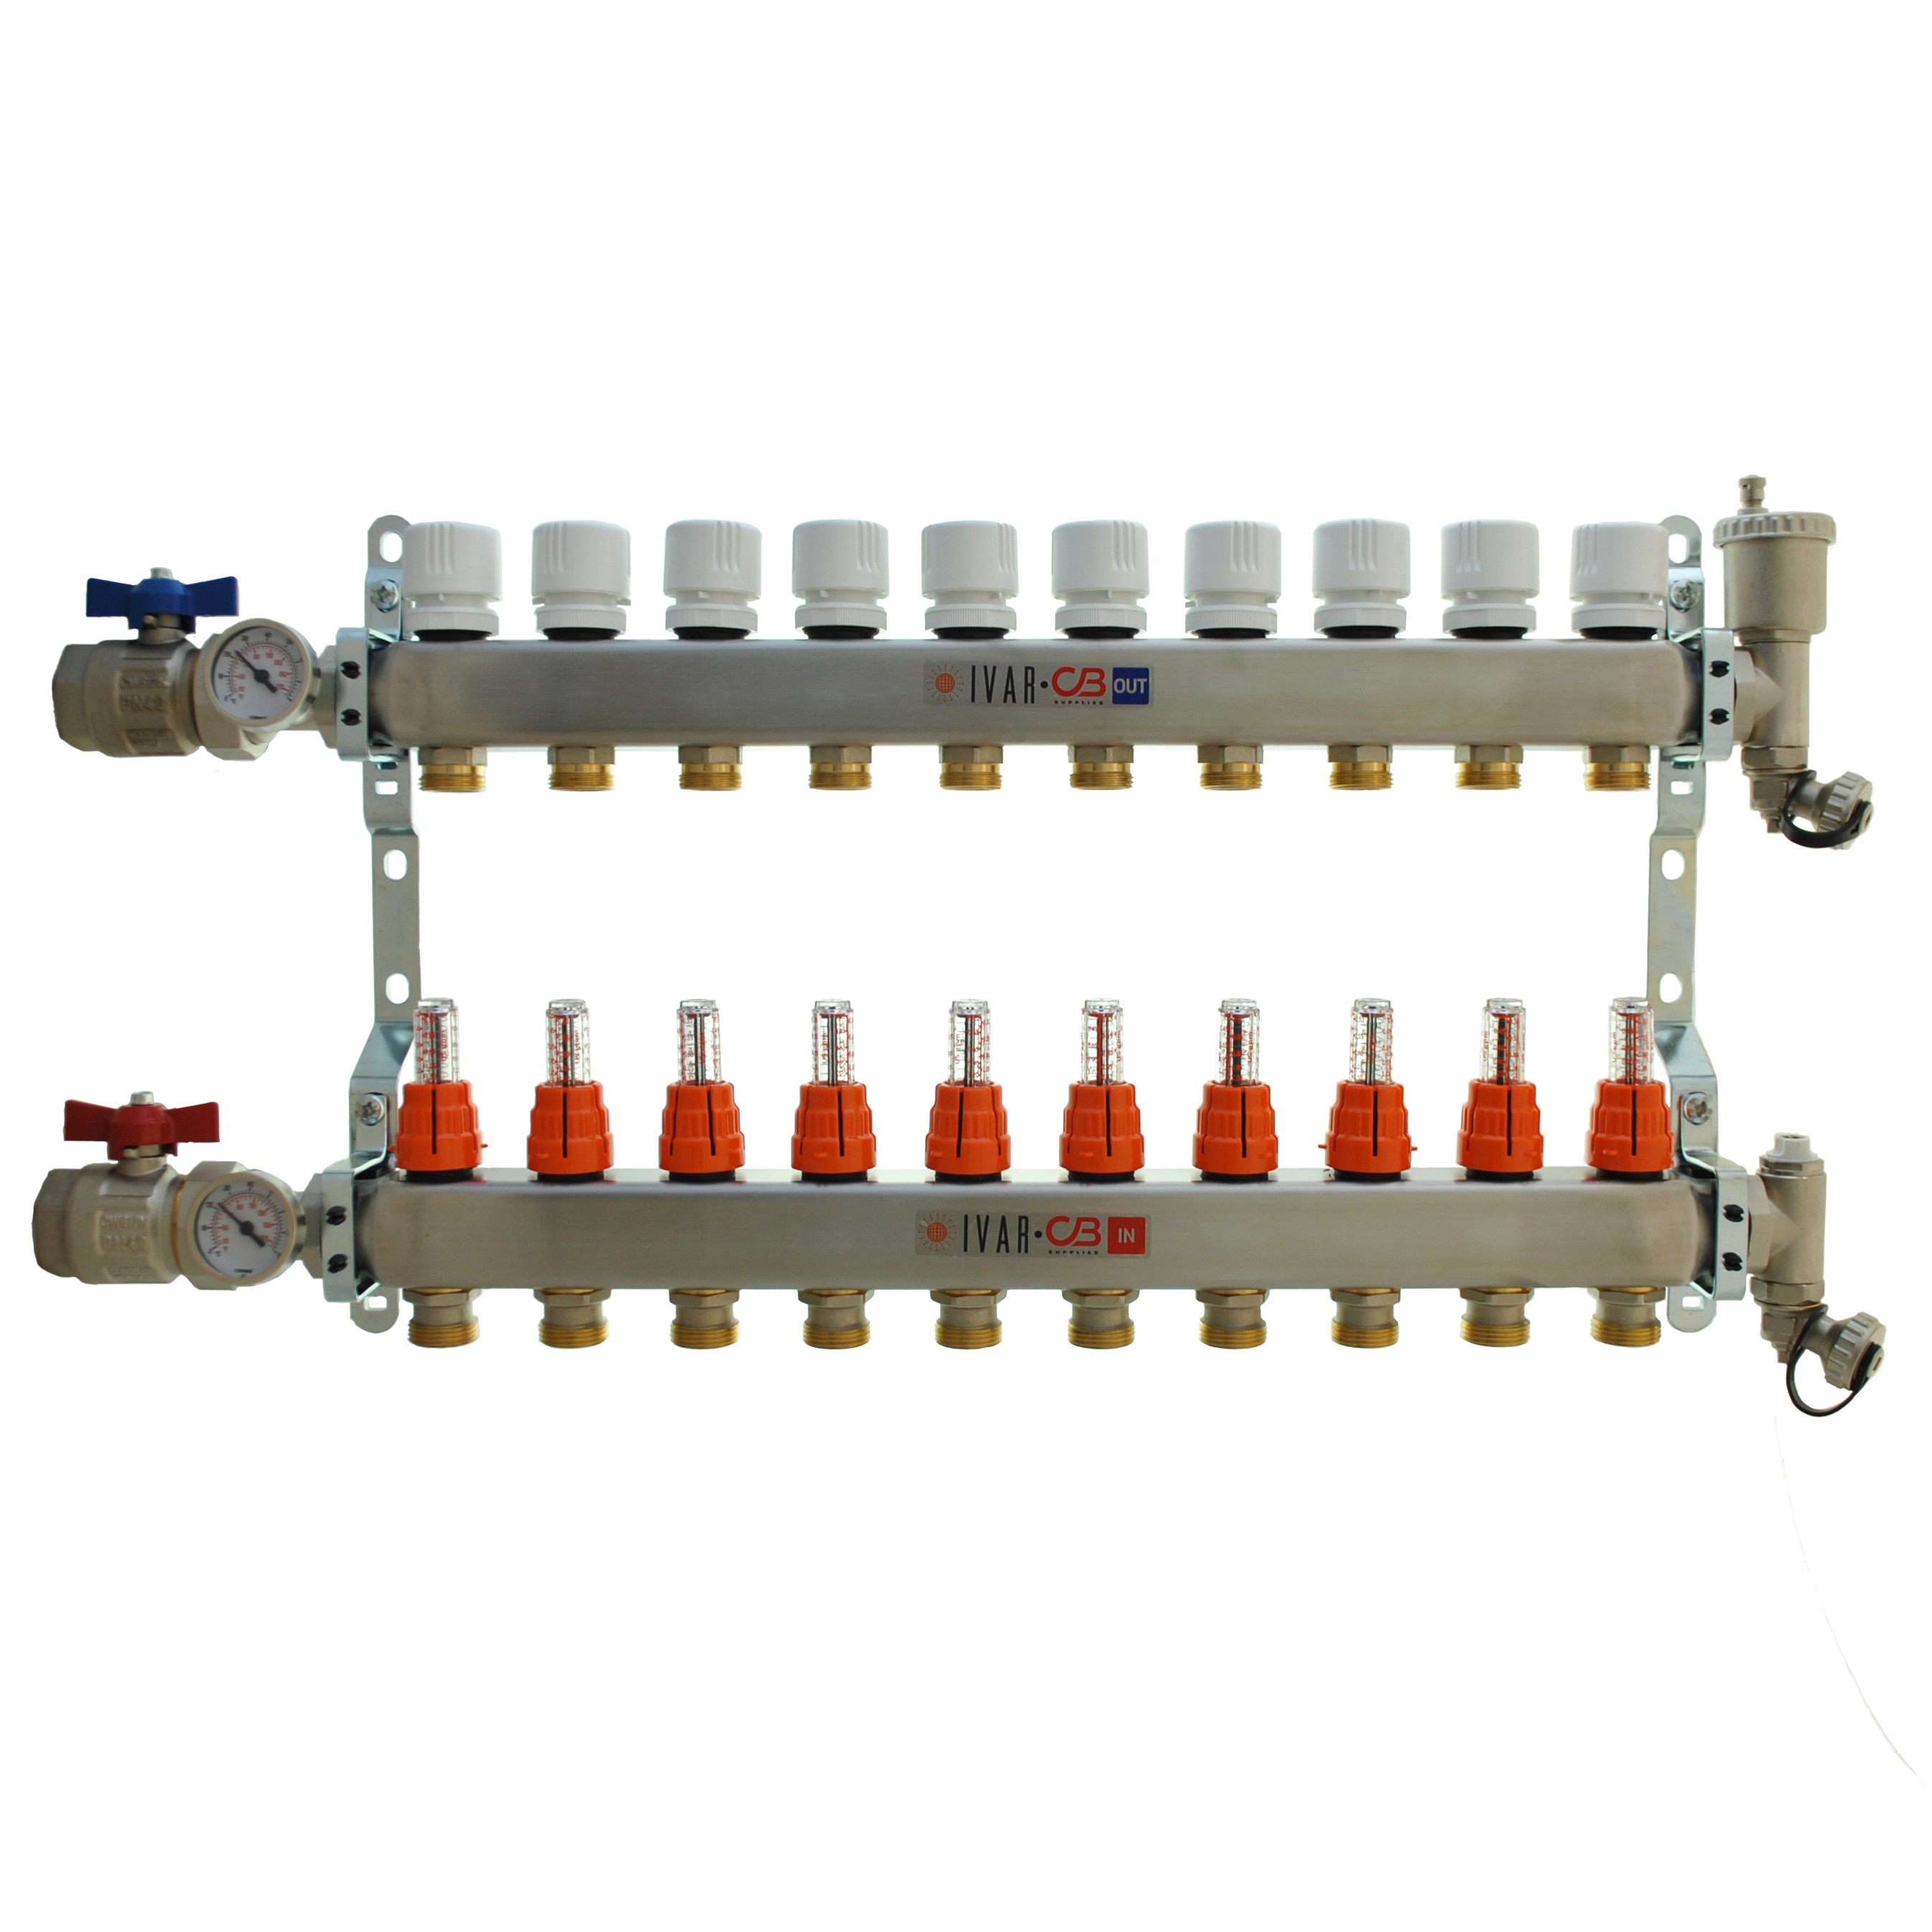 1" IVAR Stainless Steel Hydronic Manifold for Radiant Floor Heating - 10 ports